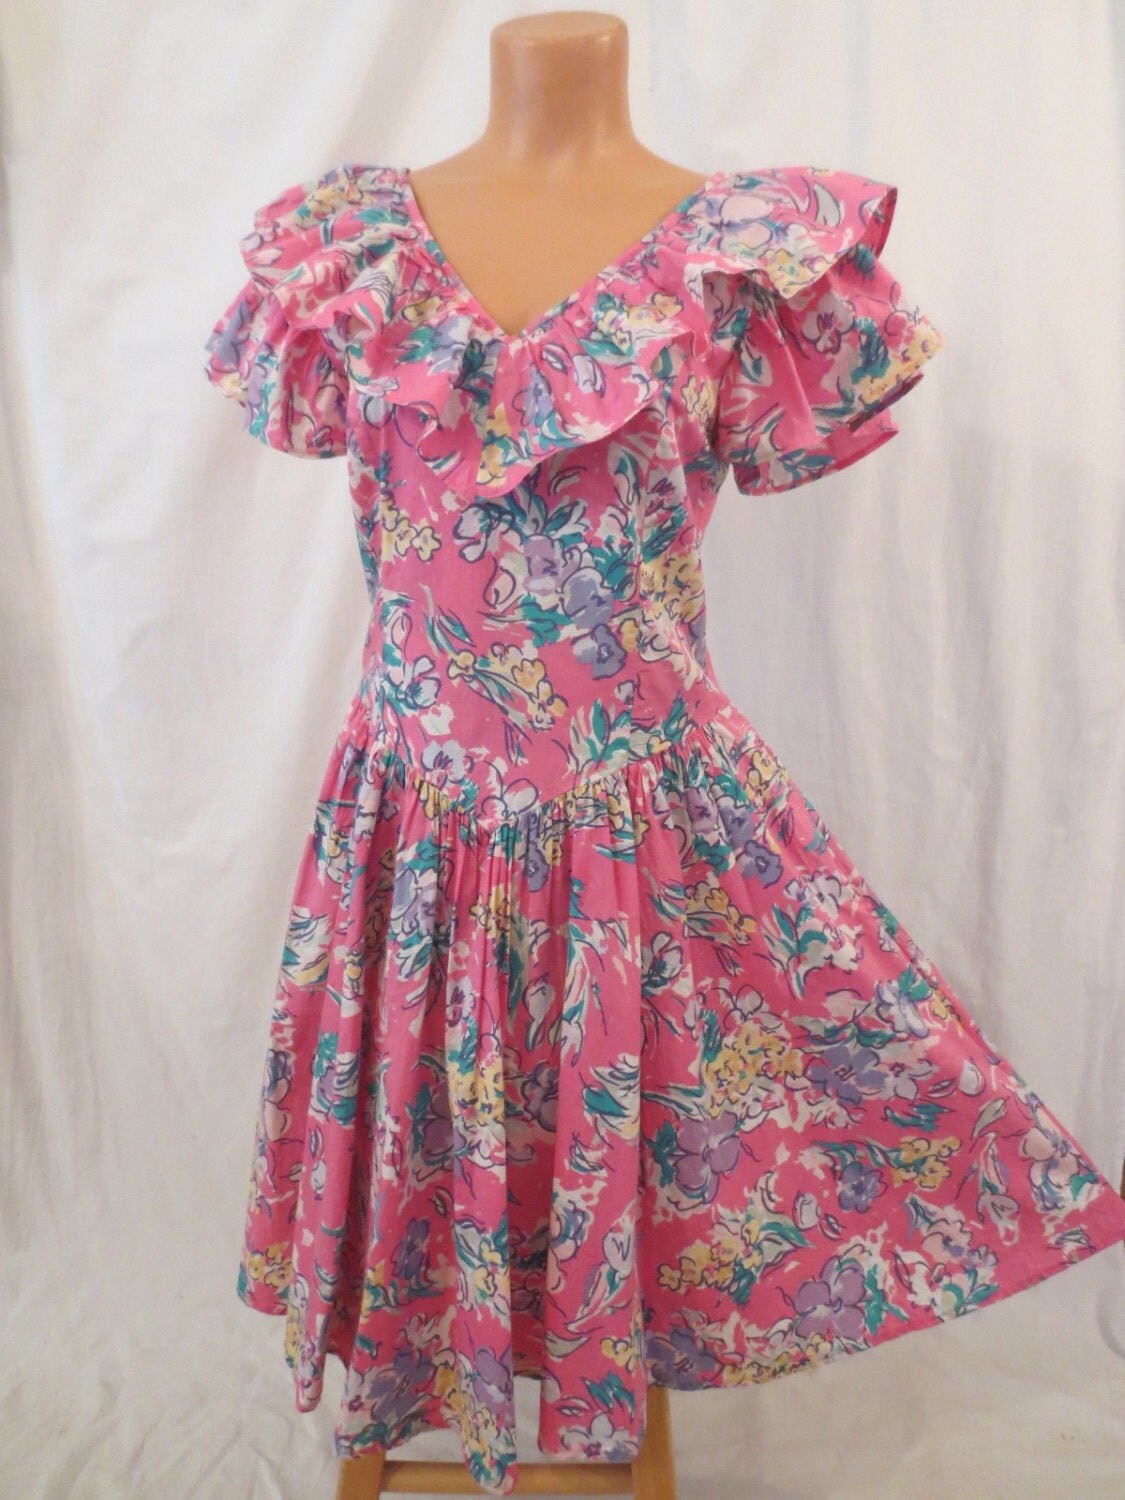 LAURA ASHLEY classic floral dress pink cotton by johnnybombshell